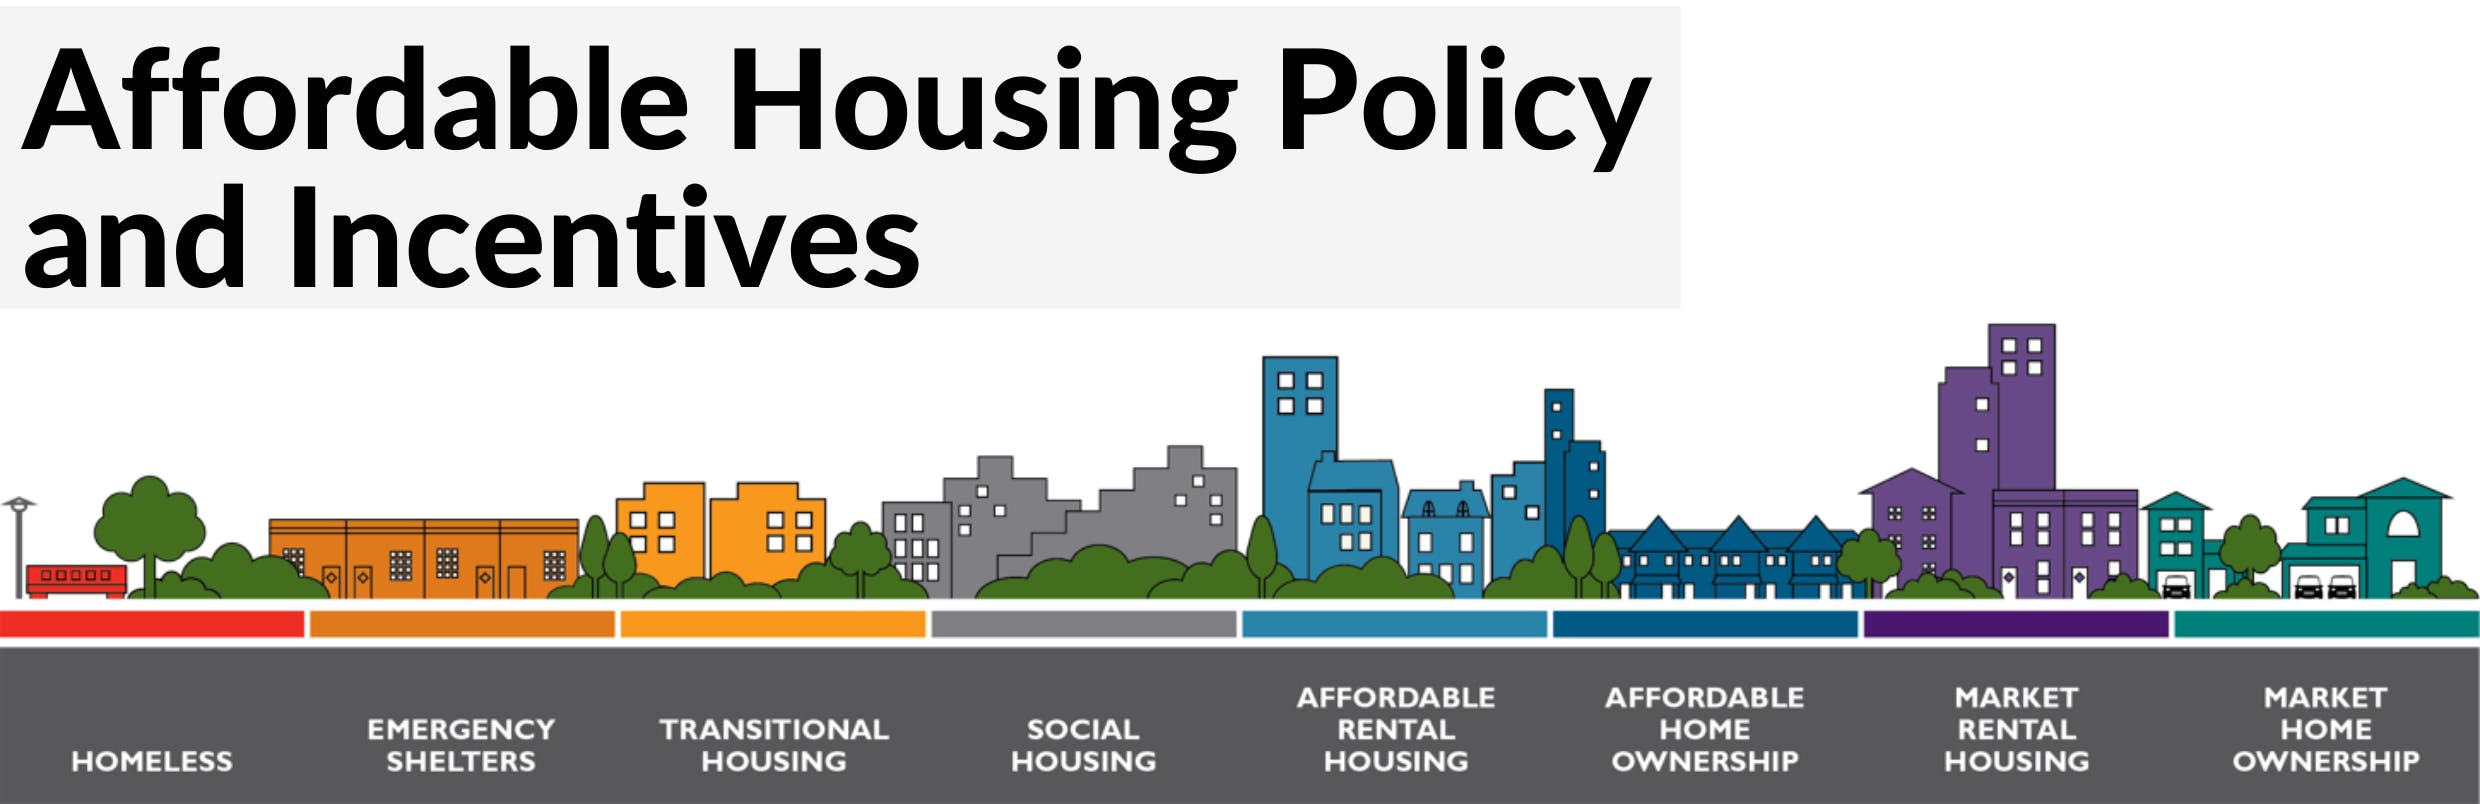 Affordable Housing Policy and Incentives